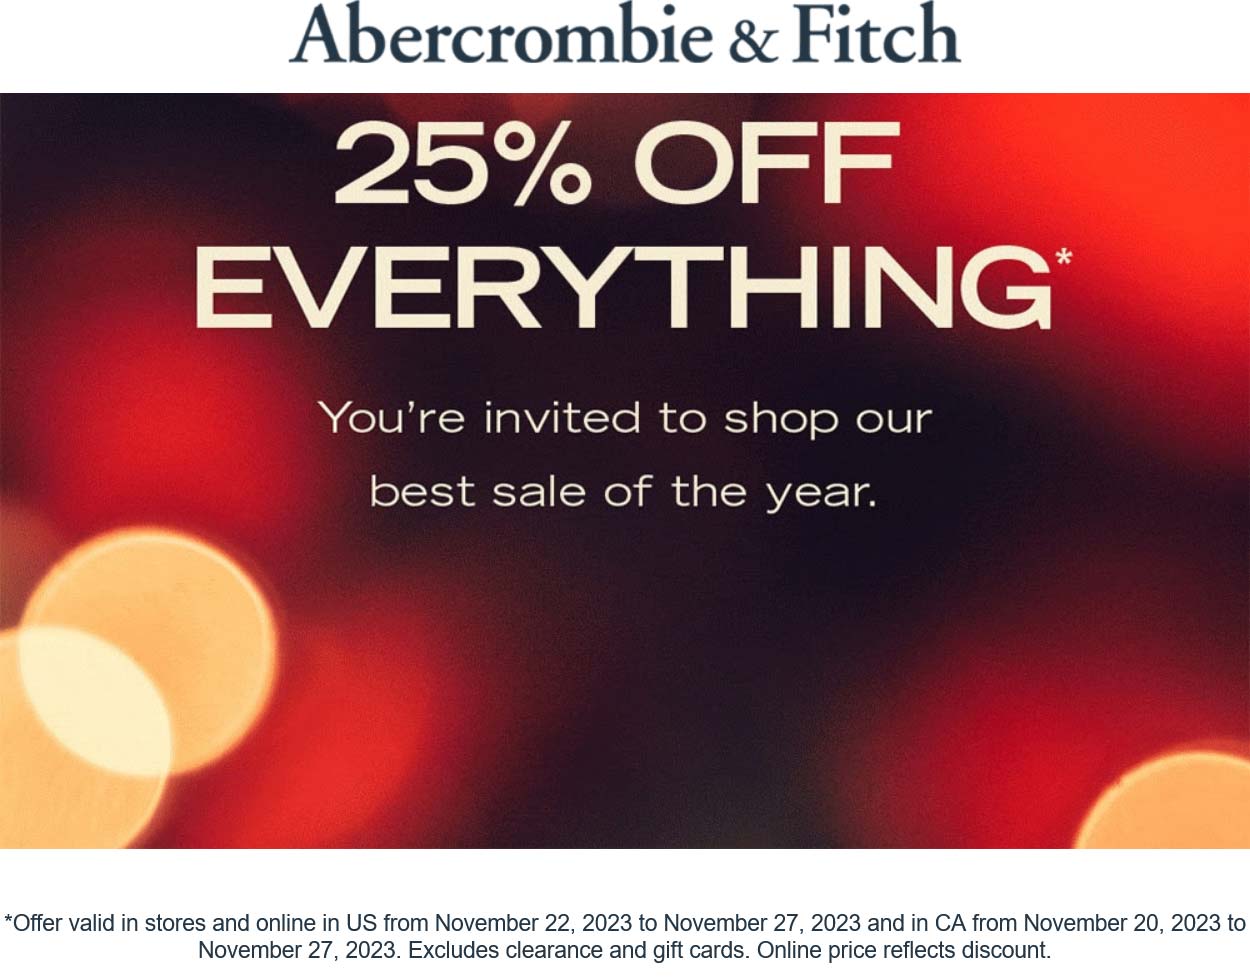 25% off everything at Abercrombie & Fitch, ditto online #abercrombiefitch